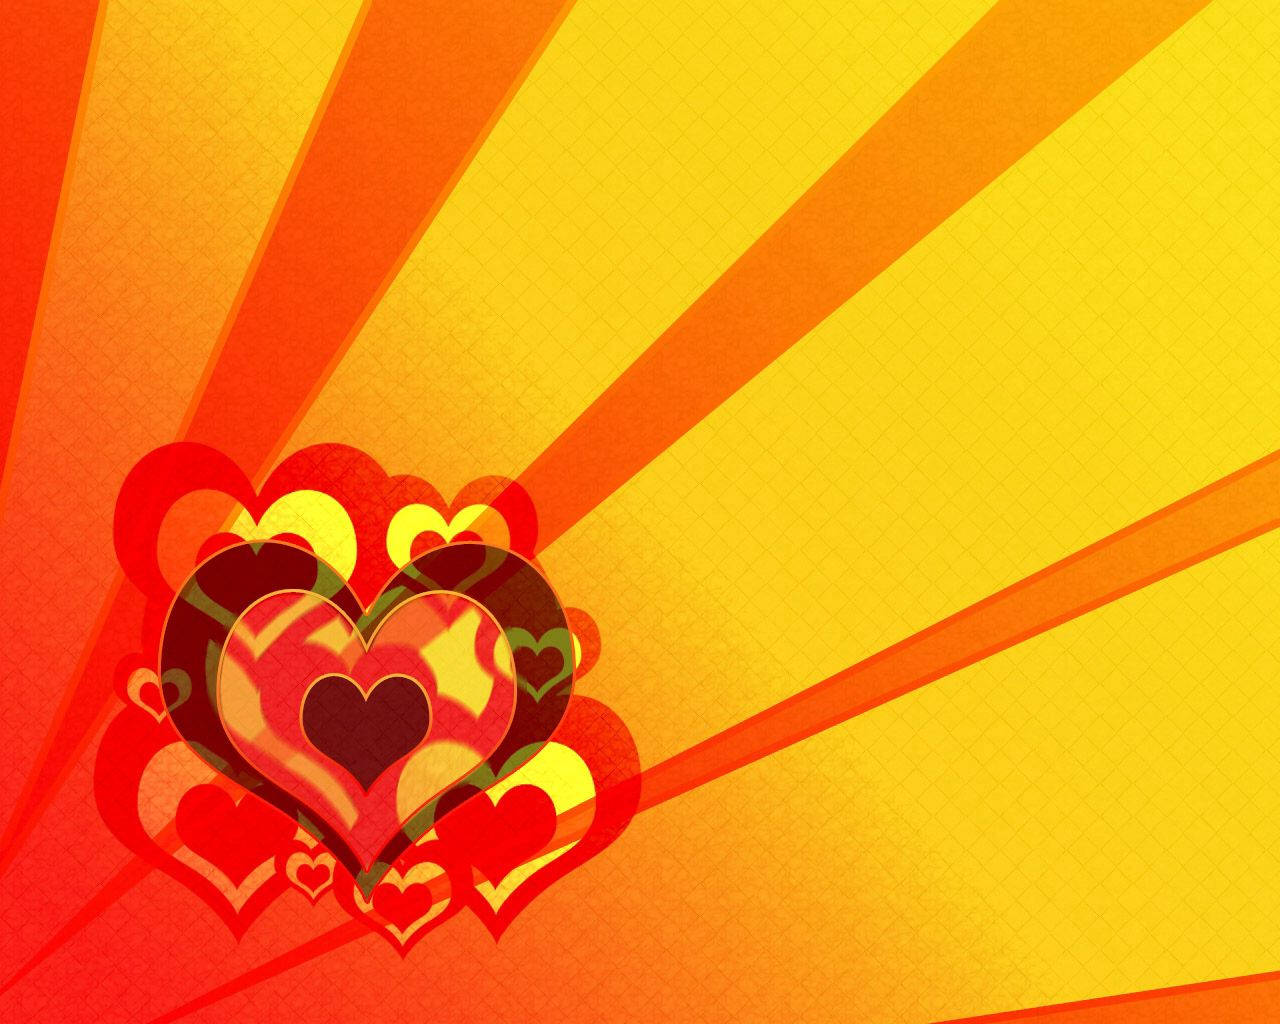 Find Your Heart In The Orange Lines Wallpaper